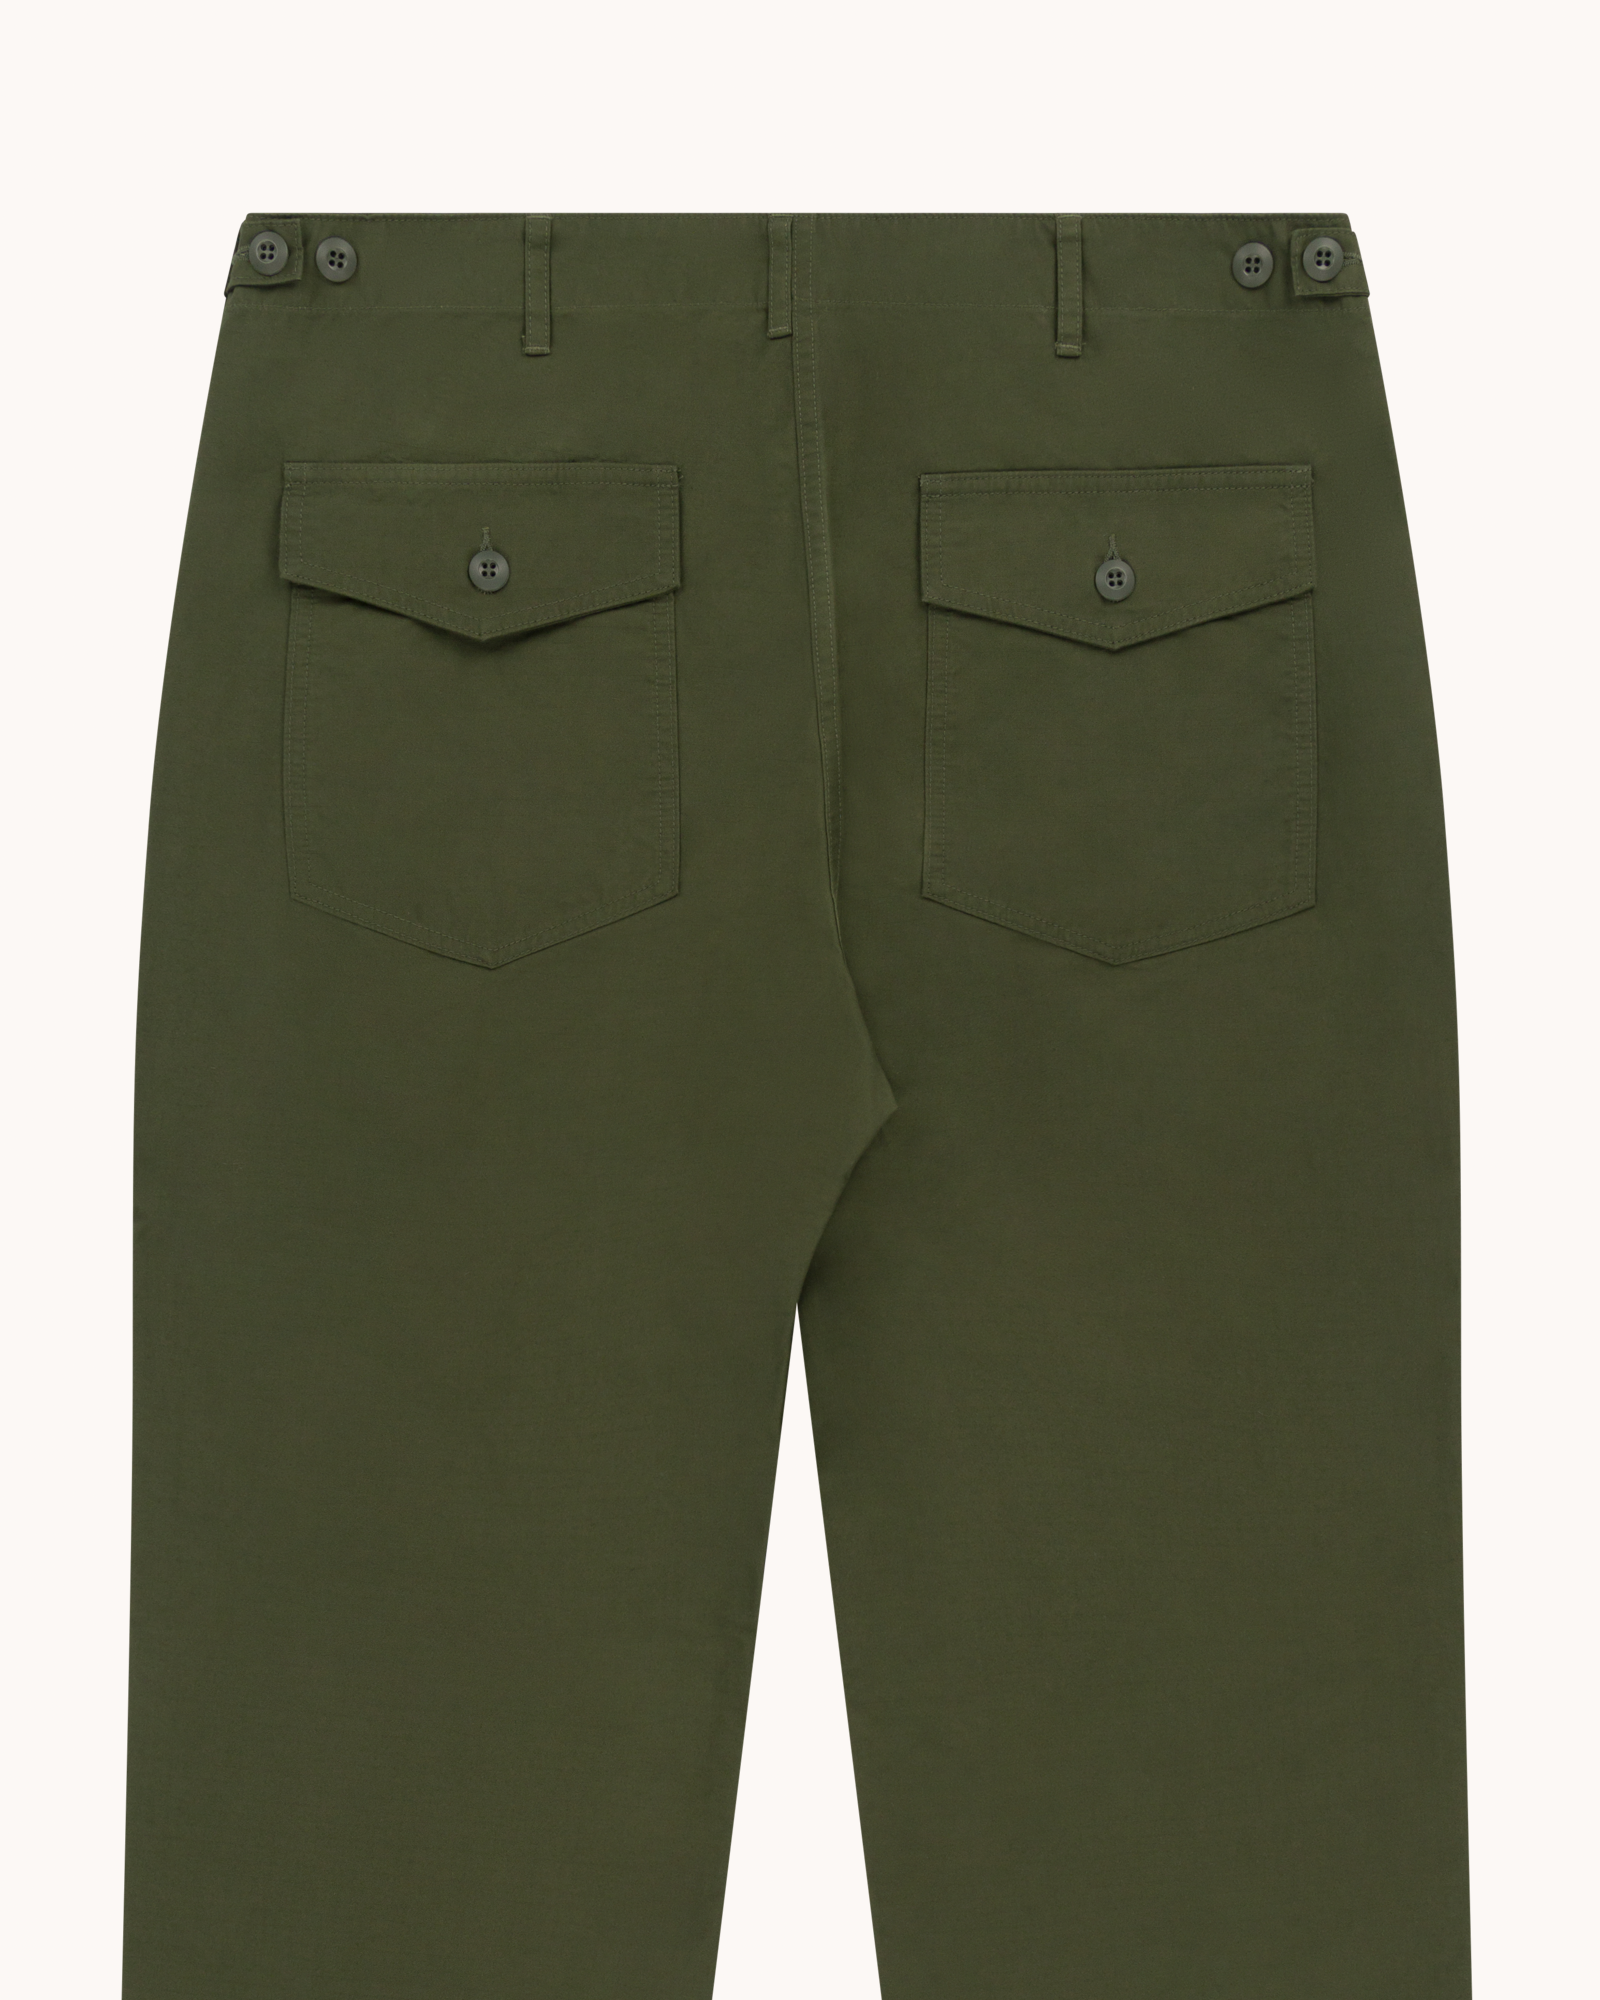 High Rise Japanese Ripstop Fatigue Pant - Army Green